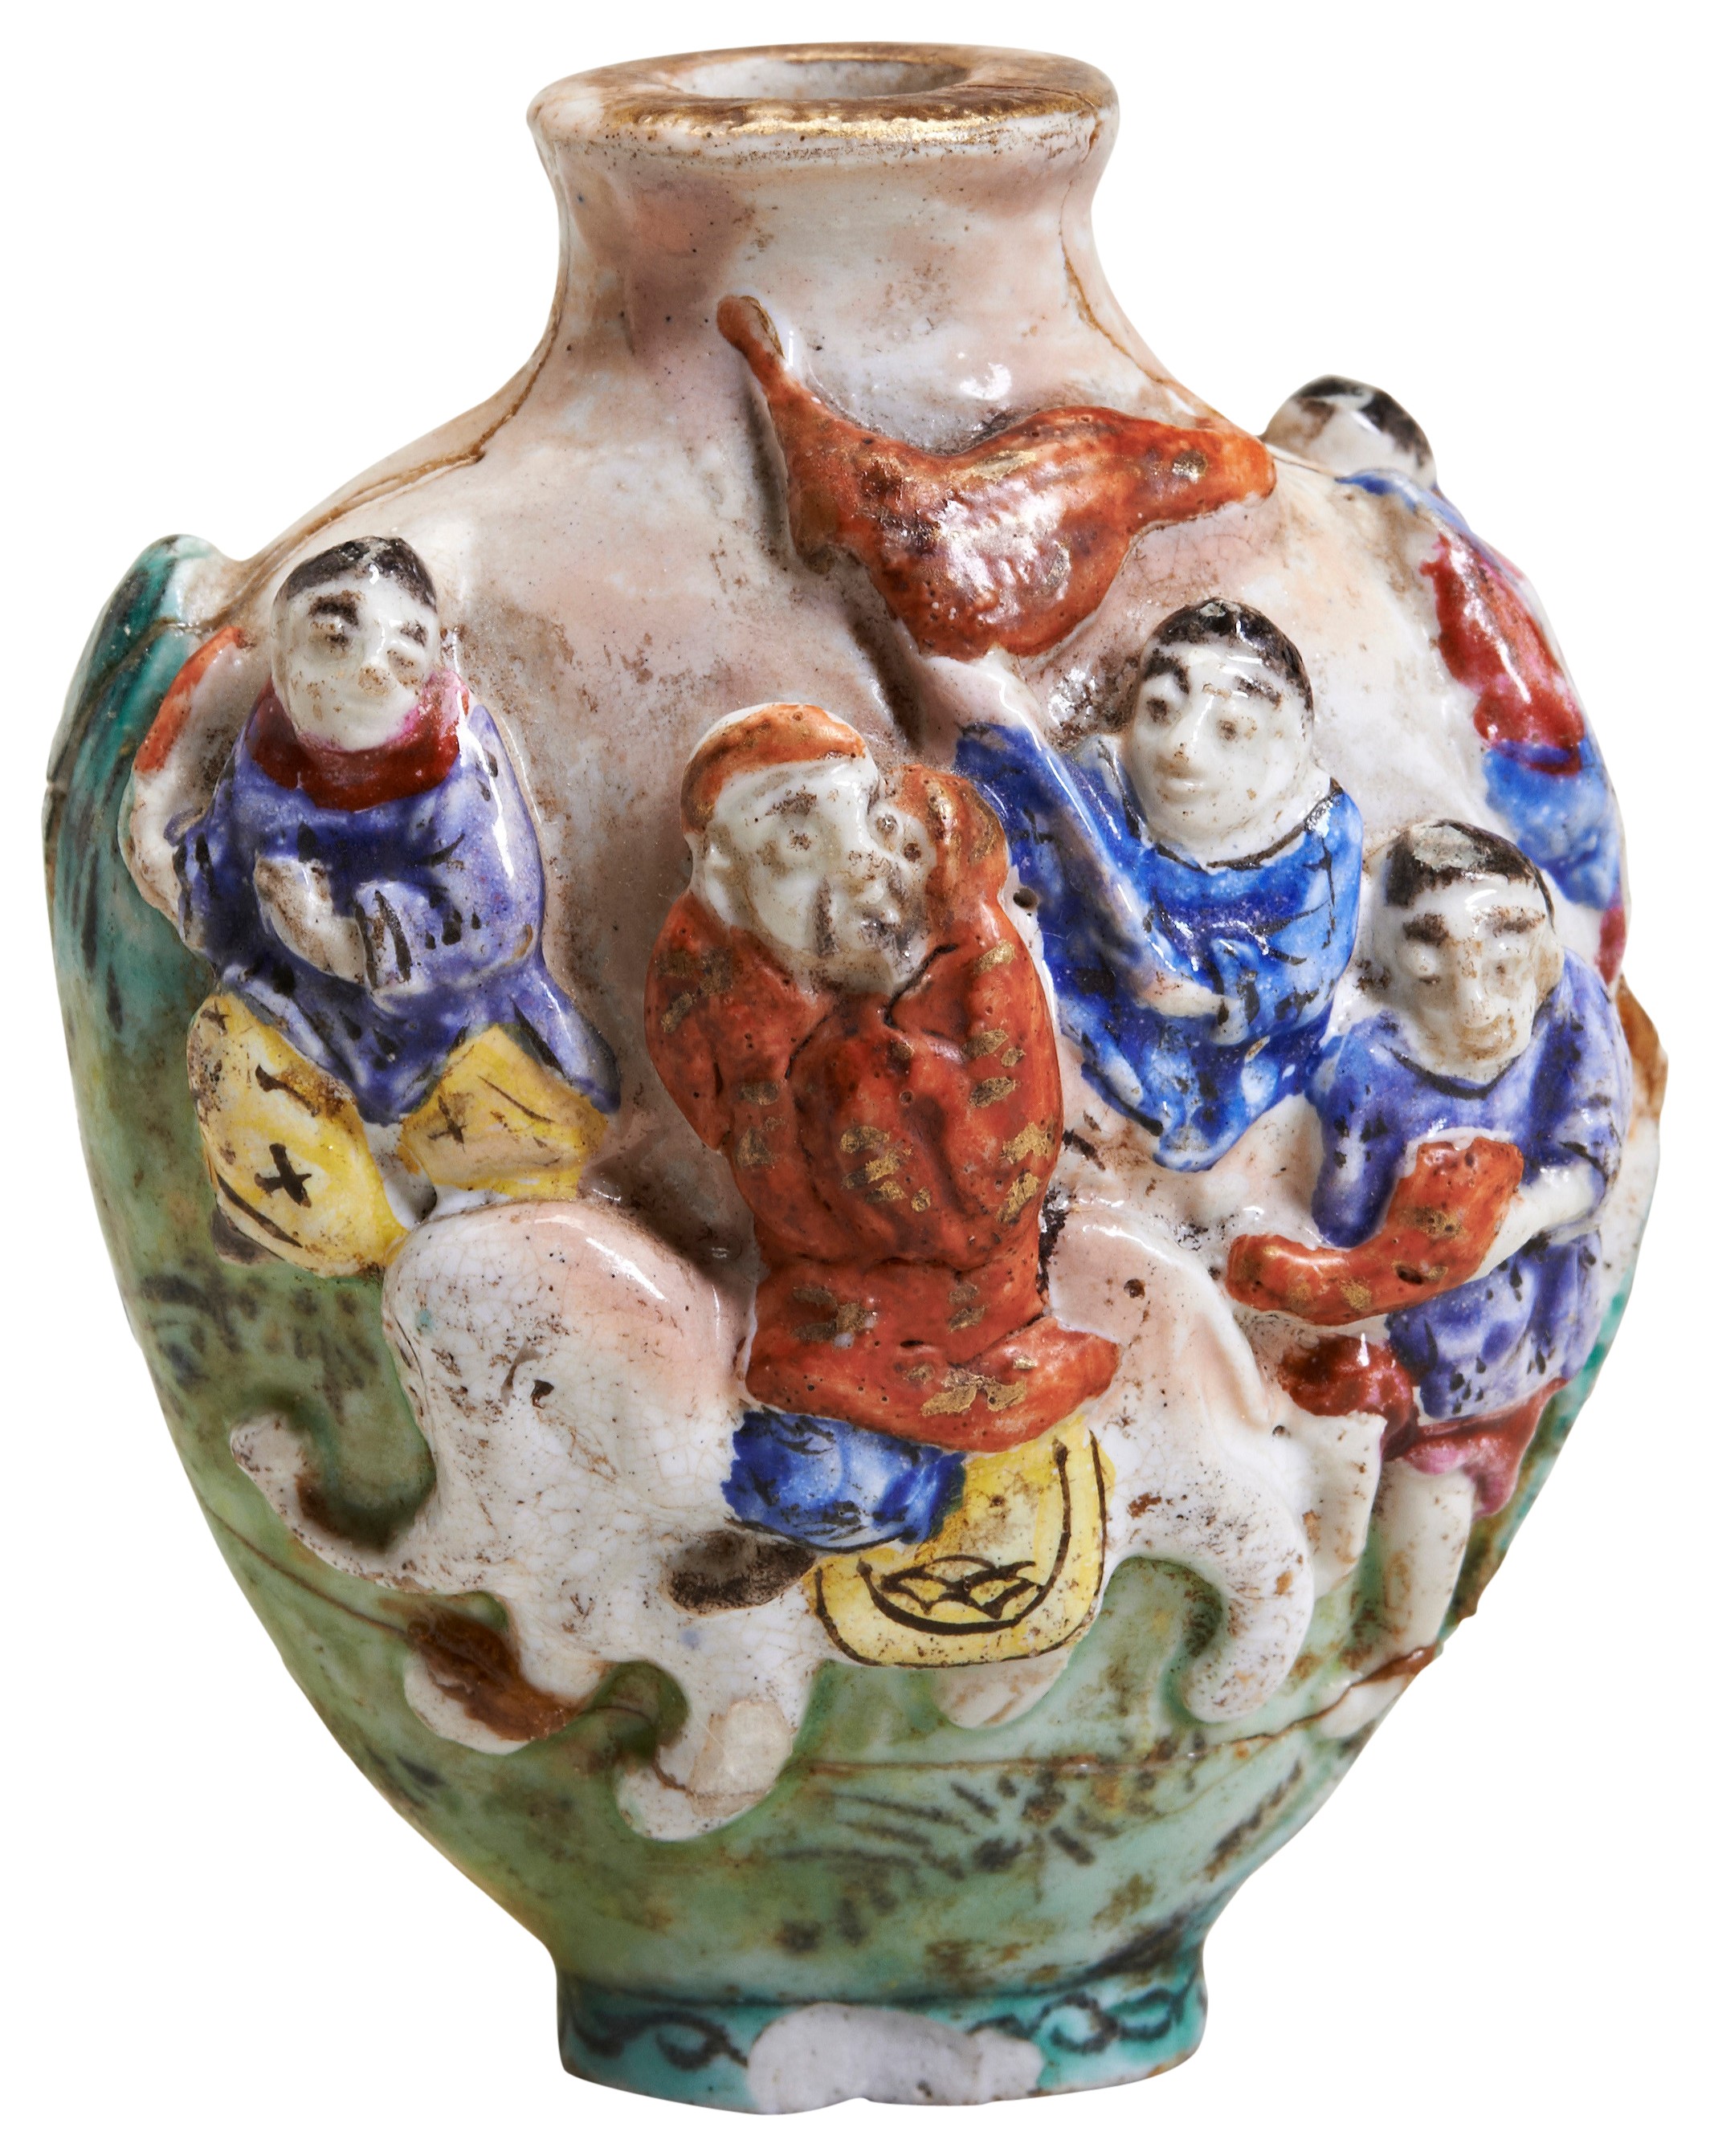 A FAMILLE ROSE MOULDED PORCELAIN SNUFF BOTTLE QING DYNASTY, 19TH CENTURY  with boys playing, bears - Image 2 of 3